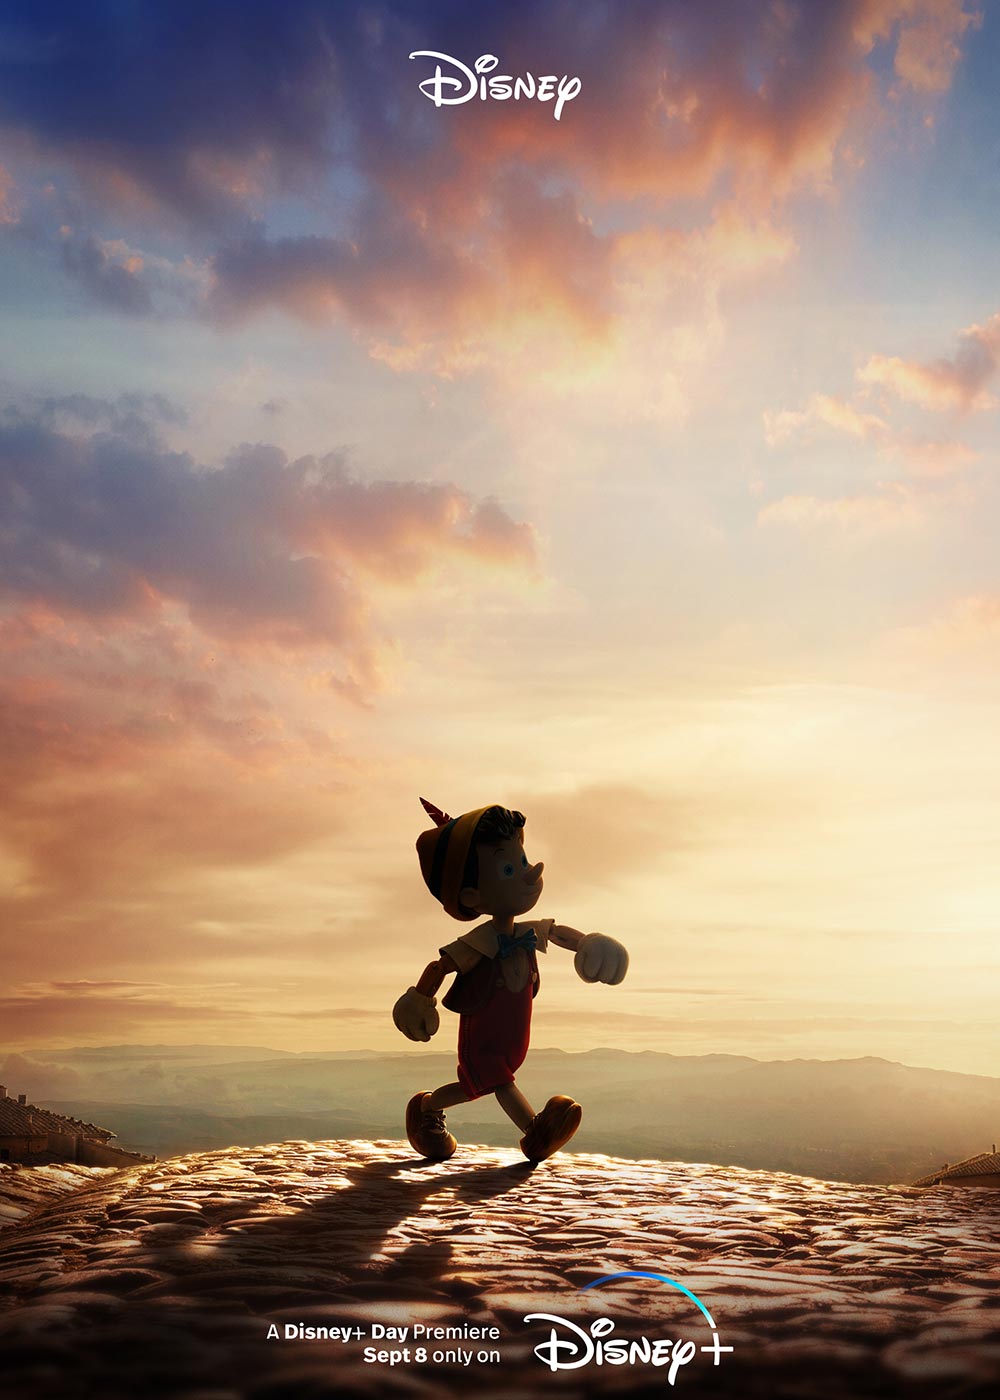 Pinocchio Movie (2022) Release Date, Review, Cast, Trailer, Watch